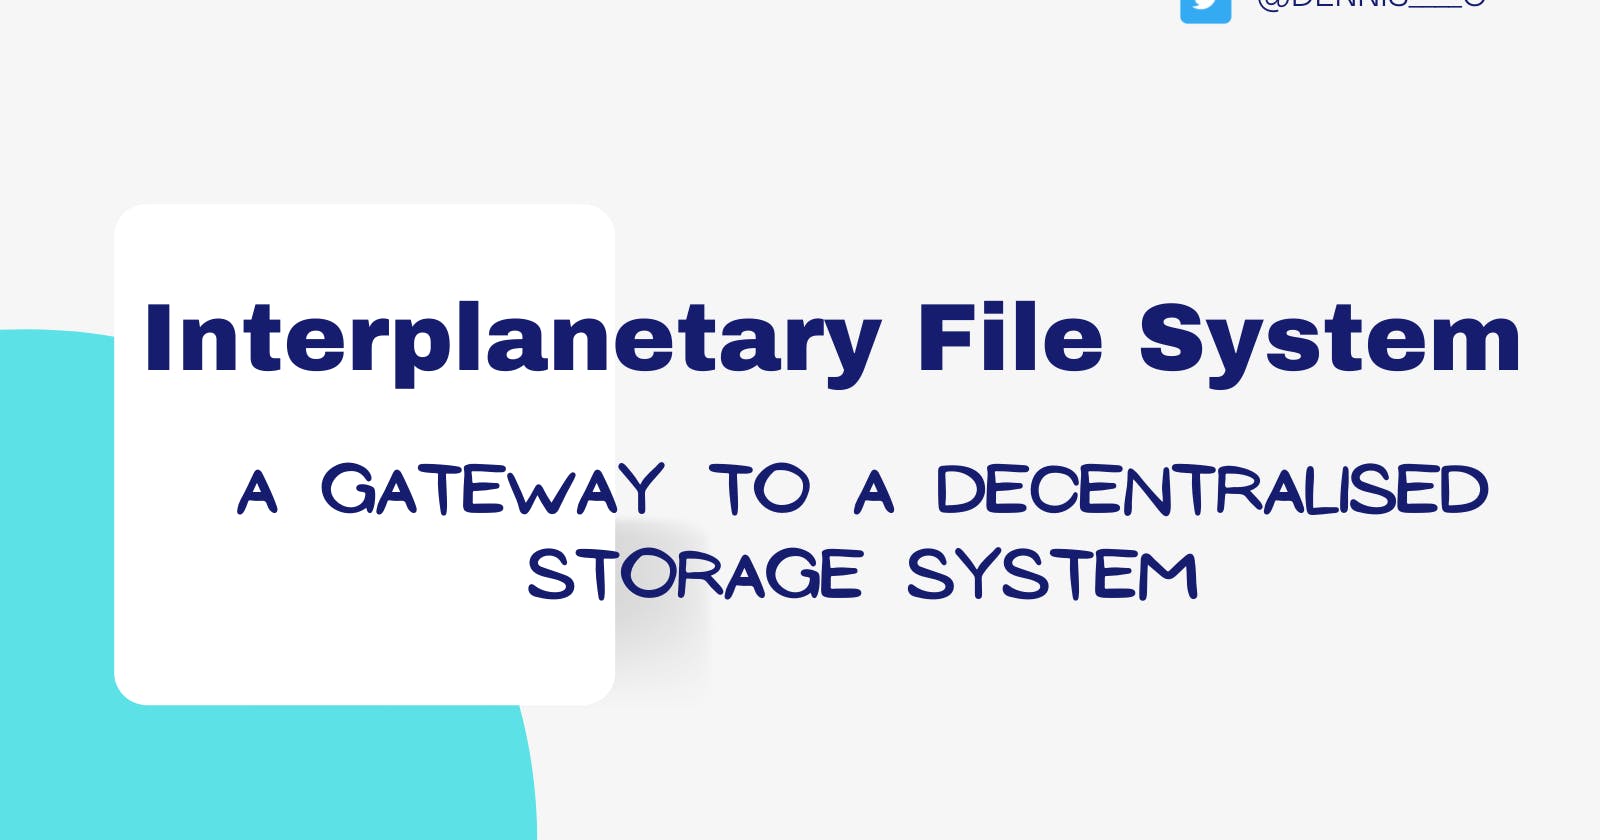 Interplanetary File System(IPFS)- 

A GATEWAY TO A DECENTRALISED STORAGE SYSTEM.